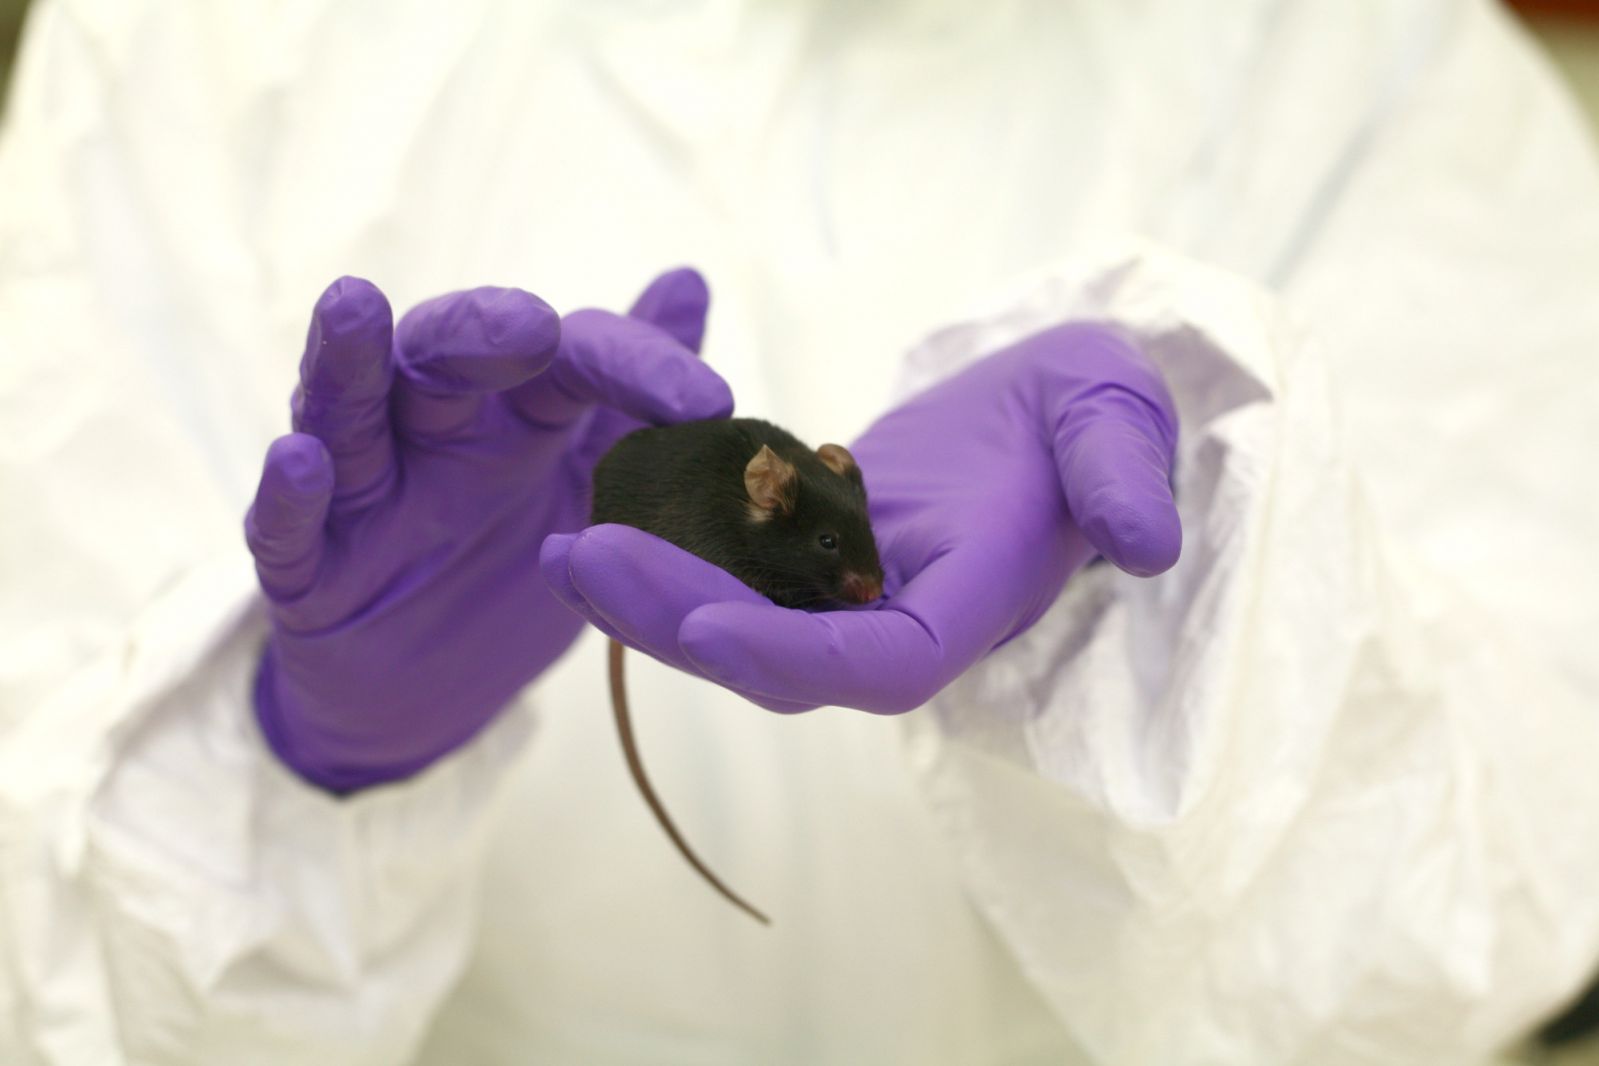 Black mouse in gloved hand